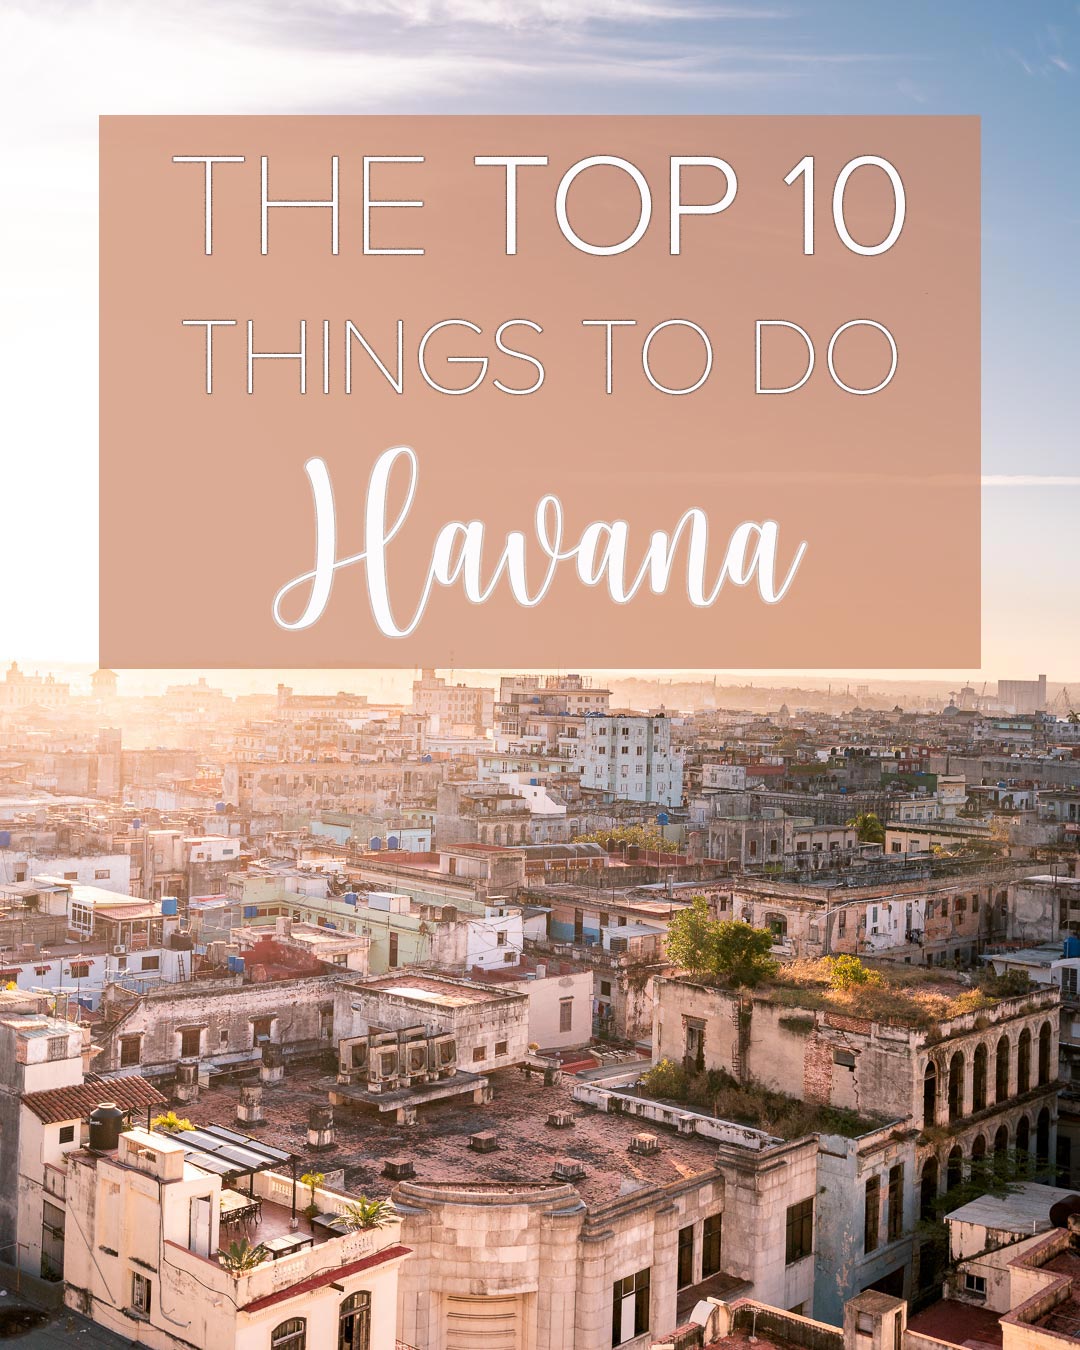 The Top 10 Things To Do In Havana, Cuba • The Top 10 Things To Do In Cuba